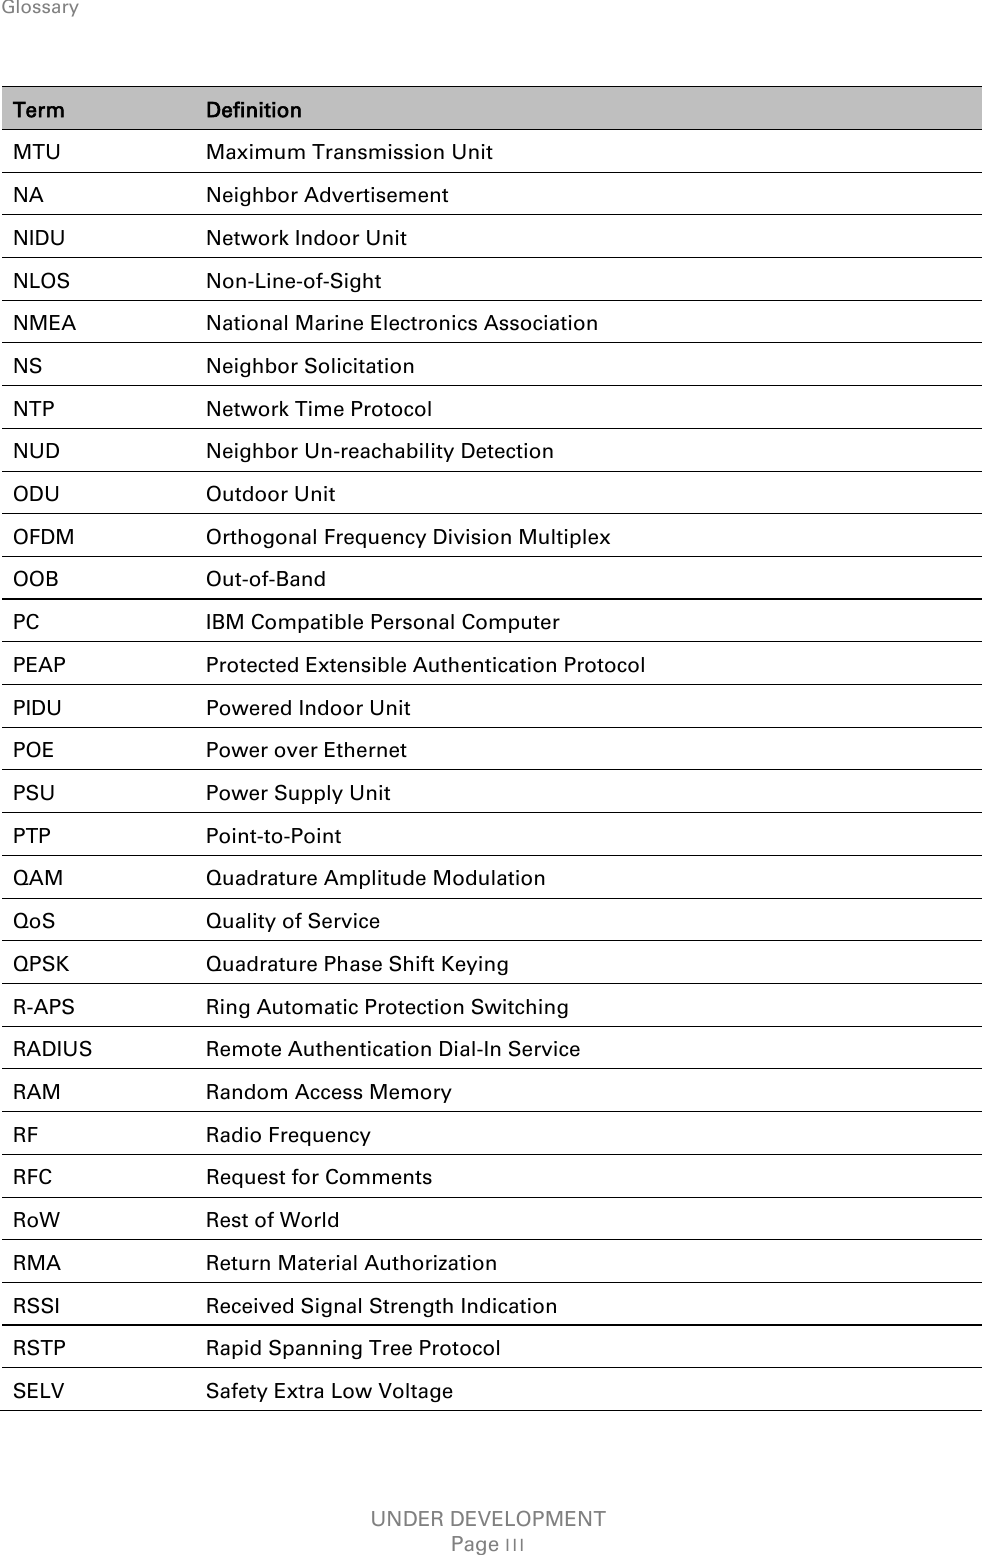 Glossary    Term Definition MTU Maximum Transmission Unit NA Neighbor Advertisement NIDU Network Indoor Unit NLOS Non-Line-of-Sight NMEA National Marine Electronics Association NS Neighbor Solicitation NTP Network Time Protocol NUD Neighbor Un-reachability Detection ODU Outdoor Unit OFDM Orthogonal Frequency Division Multiplex OOB Out-of-Band PC IBM Compatible Personal Computer PEAP Protected Extensible Authentication Protocol PIDU Powered Indoor Unit POE Power over Ethernet PSU Power Supply Unit PTP Point-to-Point QAM Quadrature Amplitude Modulation QoS Quality of Service QPSK Quadrature Phase Shift Keying R-APS Ring Automatic Protection Switching RADIUS Remote Authentication Dial-In Service RAM Random Access Memory RF Radio Frequency RFC Request for Comments RoW Rest of World RMA Return Material Authorization RSSI Received Signal Strength Indication RSTP Rapid Spanning Tree Protocol SELV Safety Extra Low Voltage UNDER DEVELOPMENT Page III 